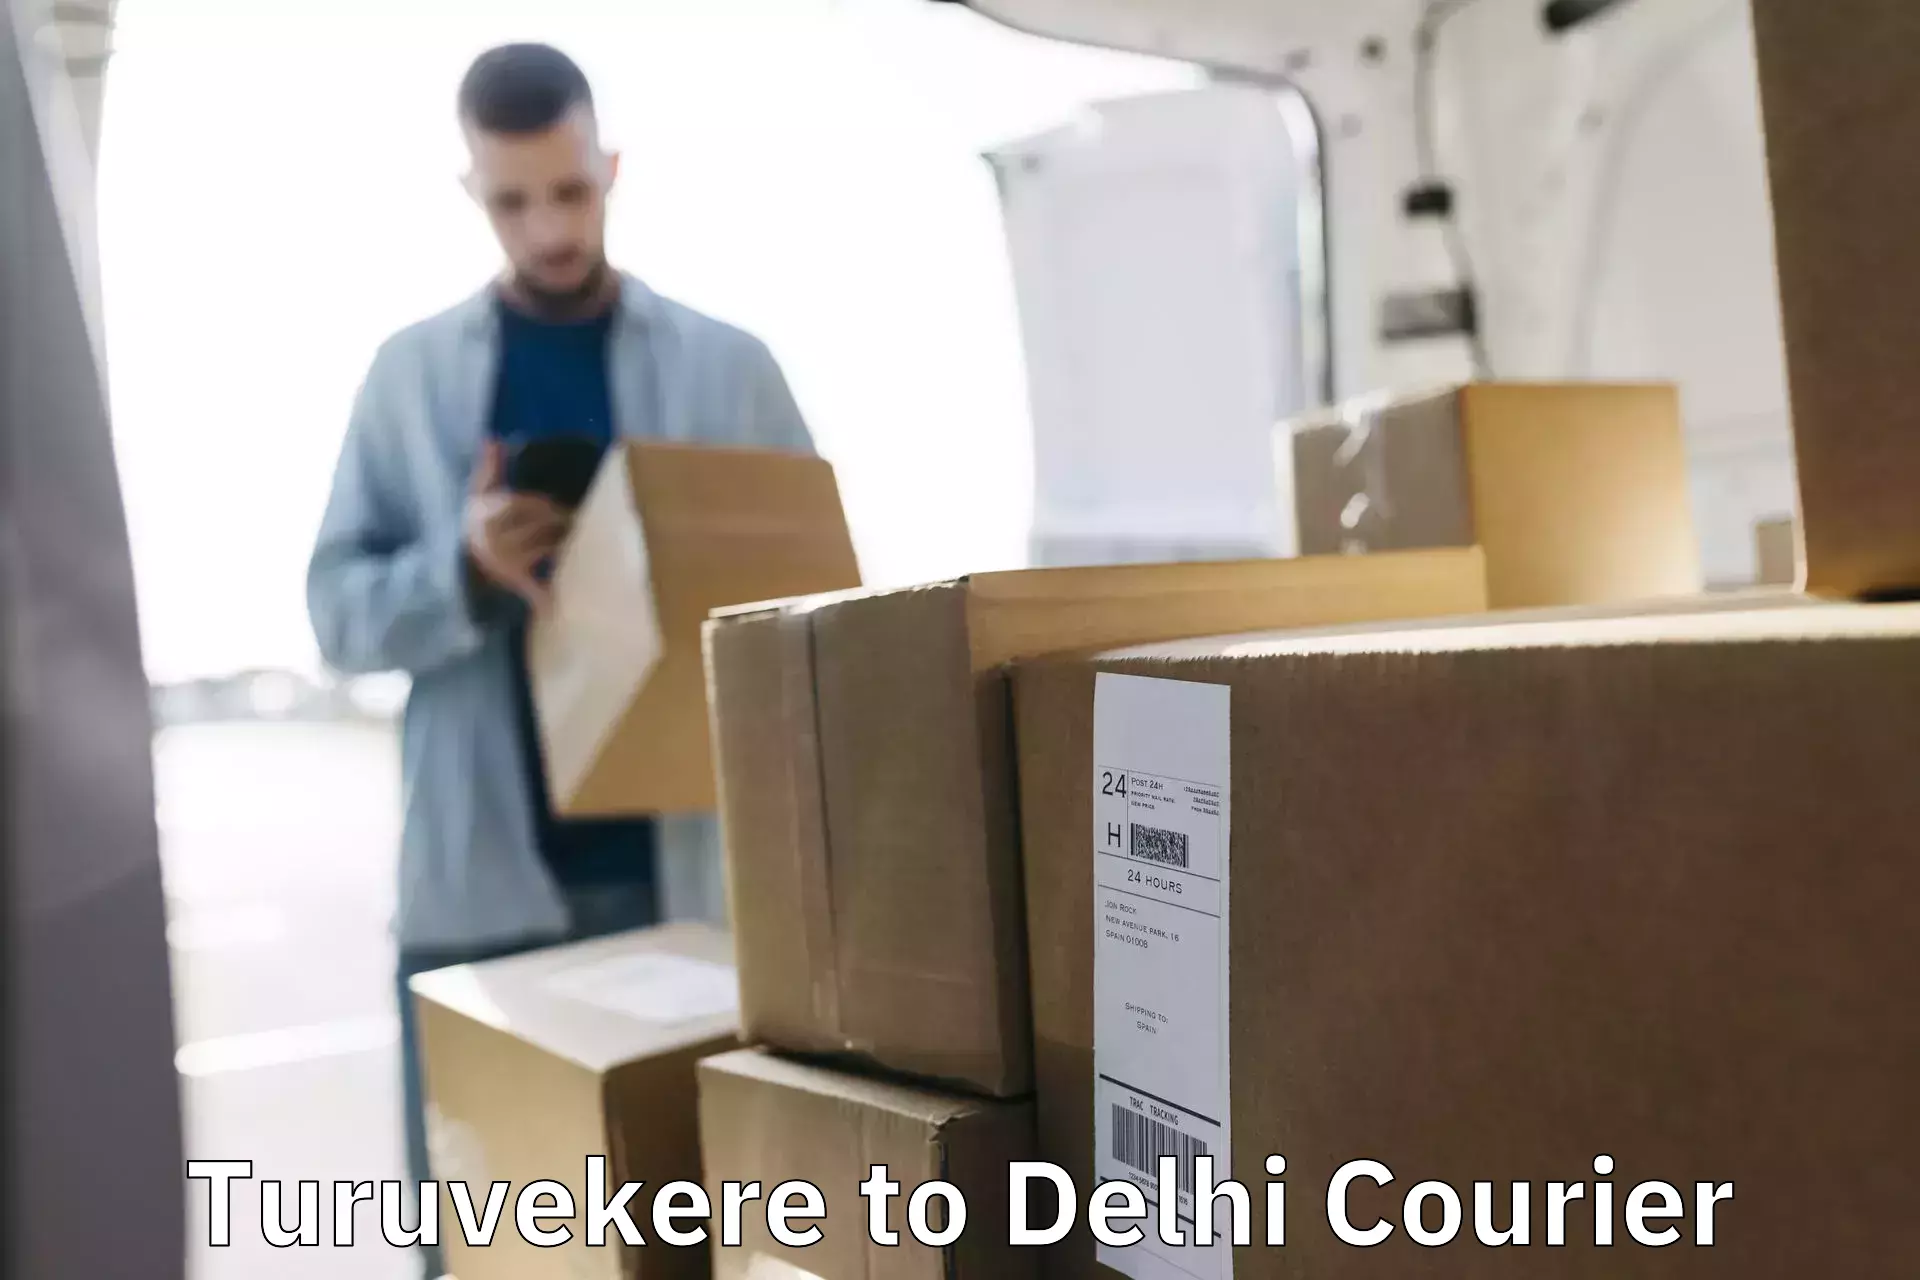 Sustainable delivery practices Turuvekere to Jawaharlal Nehru University New Delhi